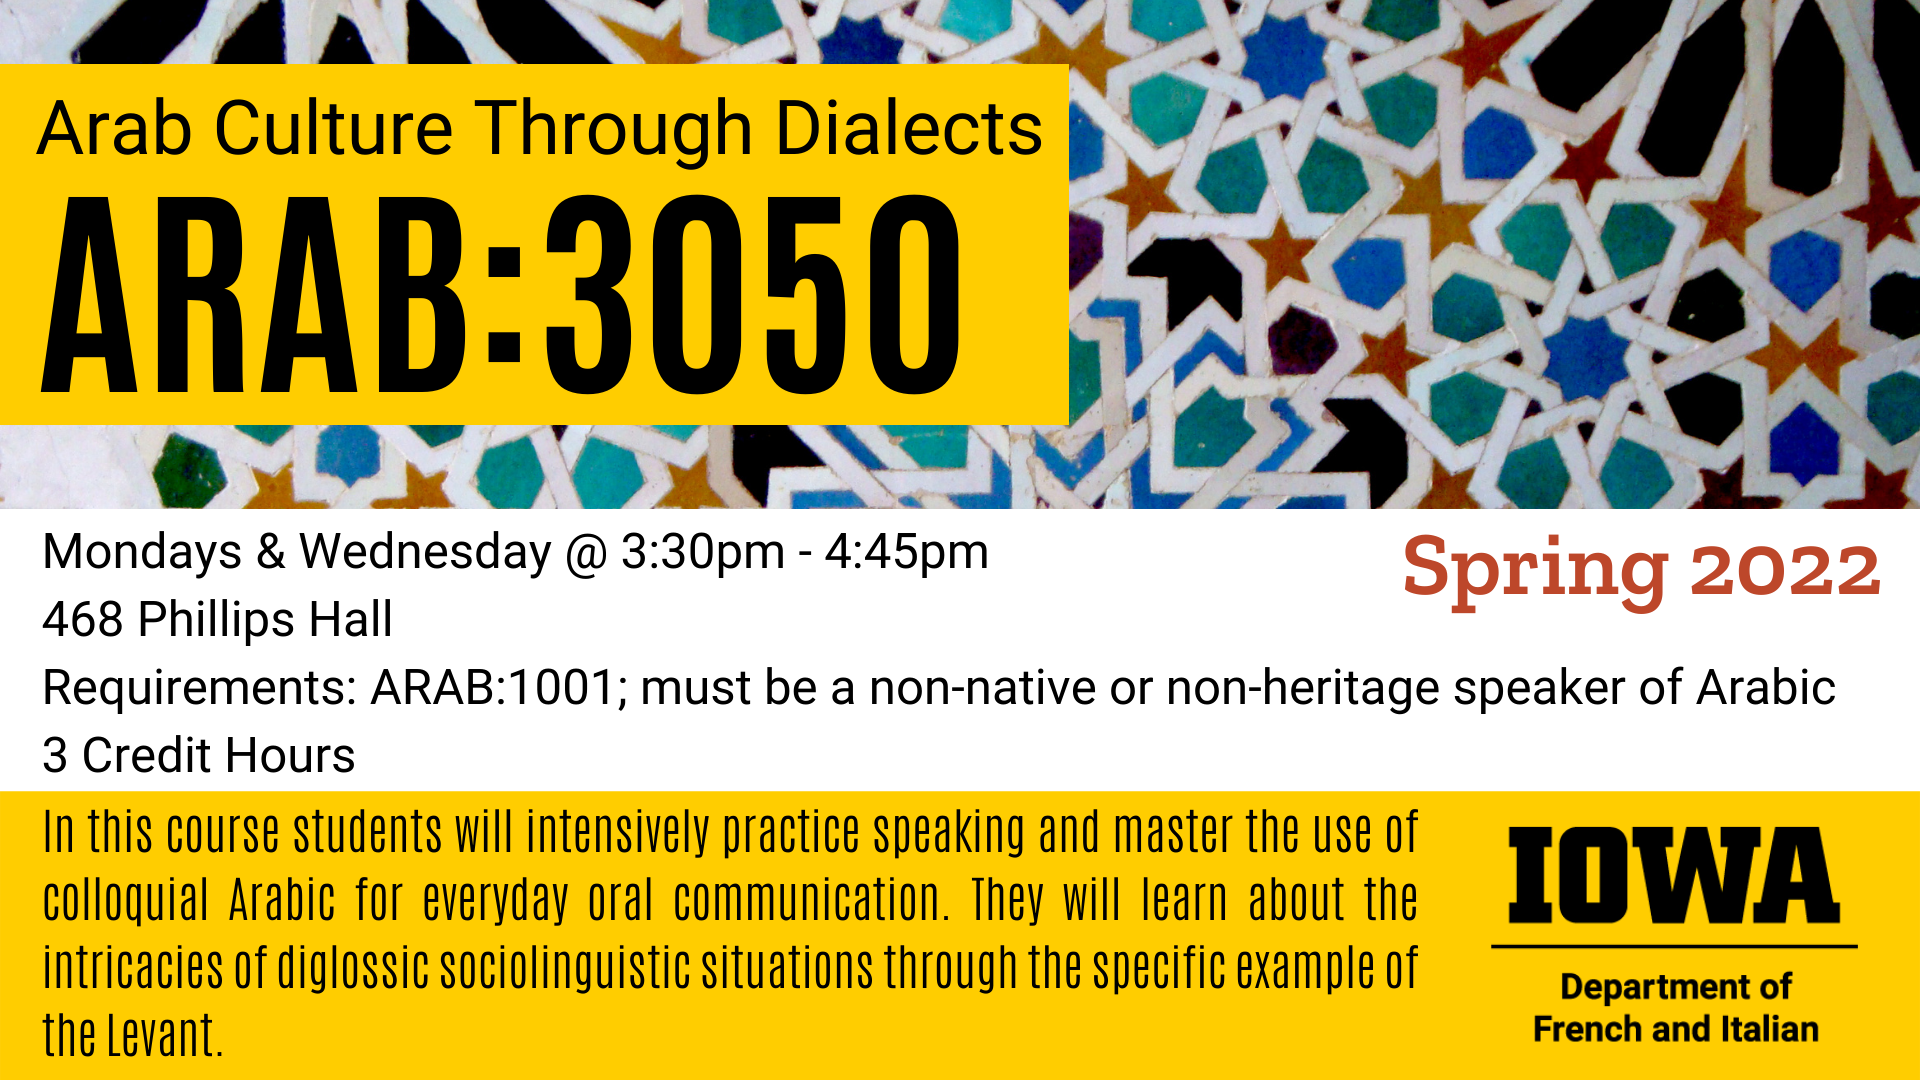 Arab Culture Through Dialects ARAB 3050 happening Spring 2022. Mondays and Wednesday from 3:30pm to 4:45pm in 468 Phillips Hall Requirements: ARAB 1001 you must be a non-native or non-heritage speaker of Arabic. This course is 3 Credit Hours. In this course students will intensively practice speaking and master the use of colloquial Arabic for everyday oral communication. They will learn about the intricacies of diglossic sociolinguistic situations through the specific example of the Levant.